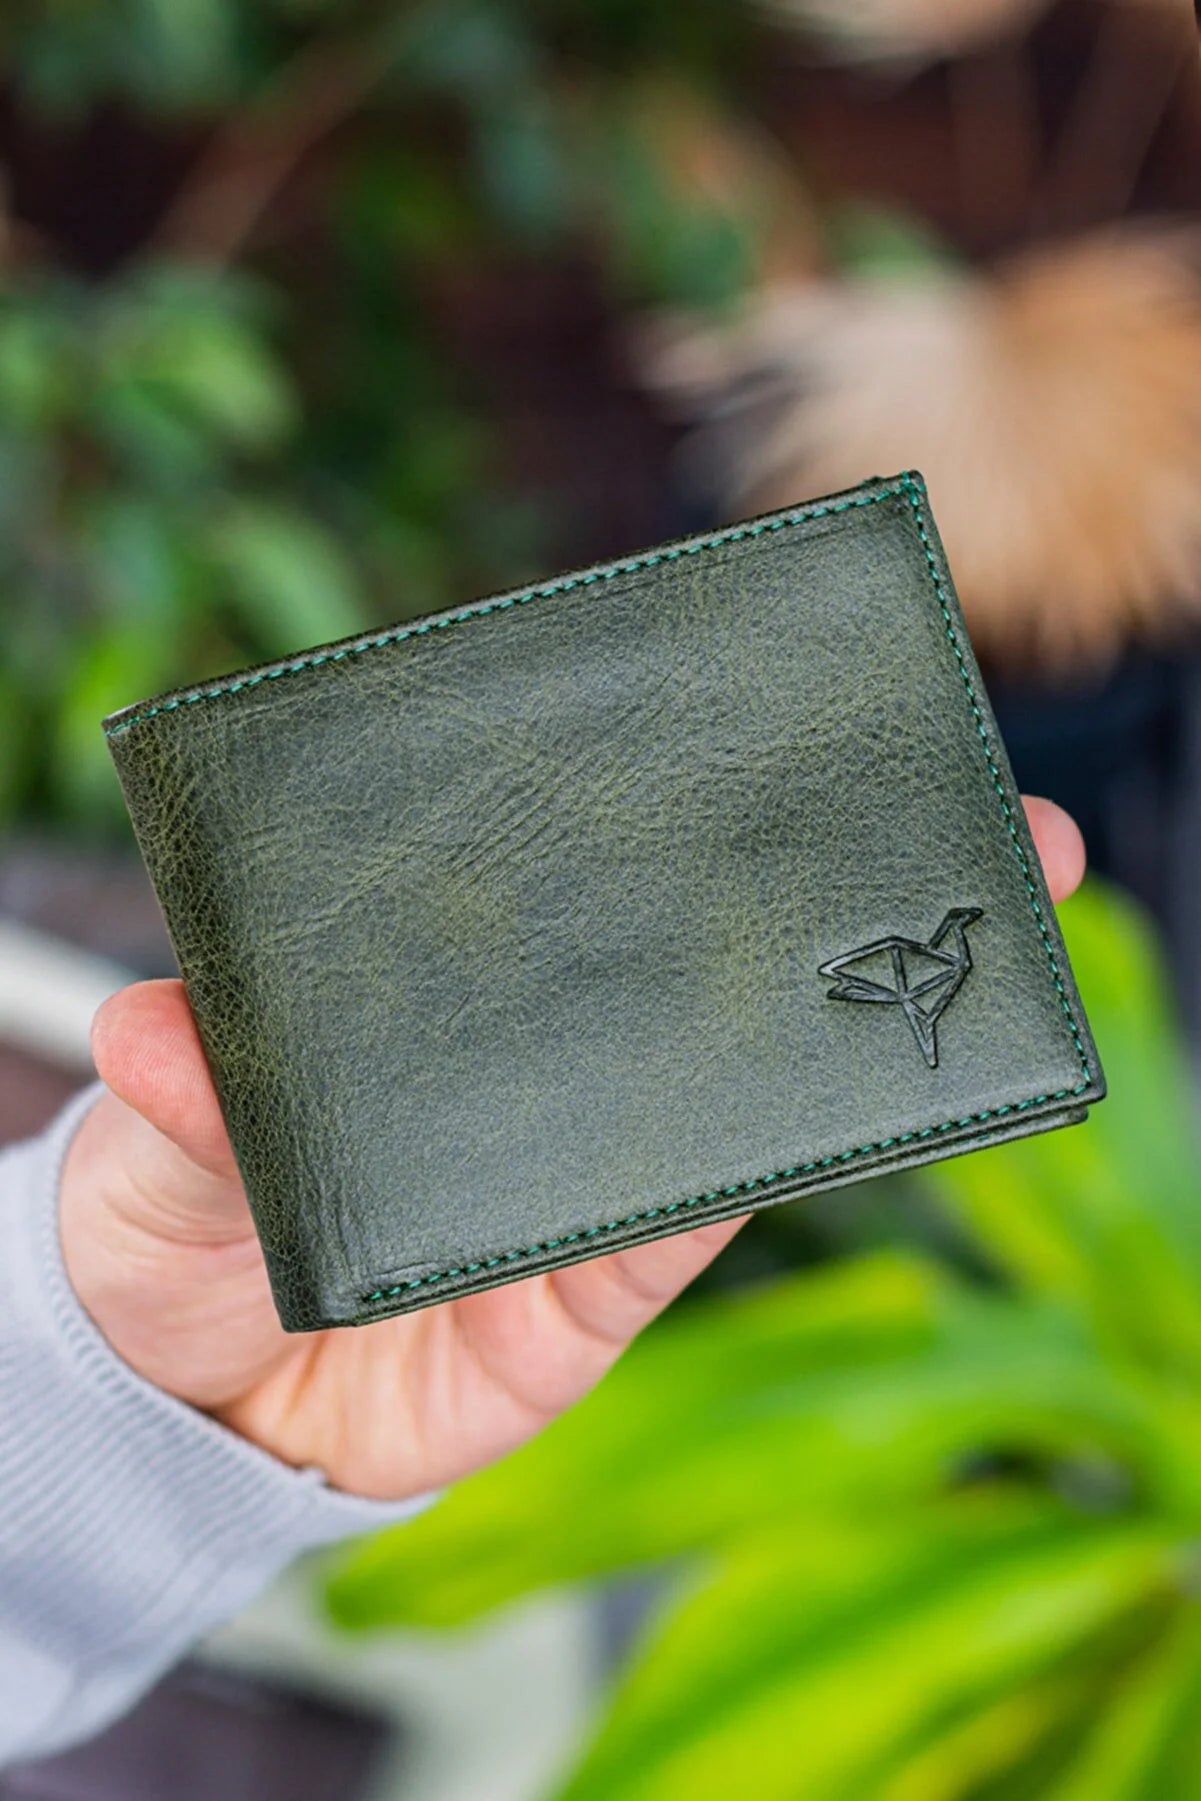 Jackson Genuine Leather RFID Blocking Geen Wallet with Coin Compartment for Men: A Stylish and Secure Choice